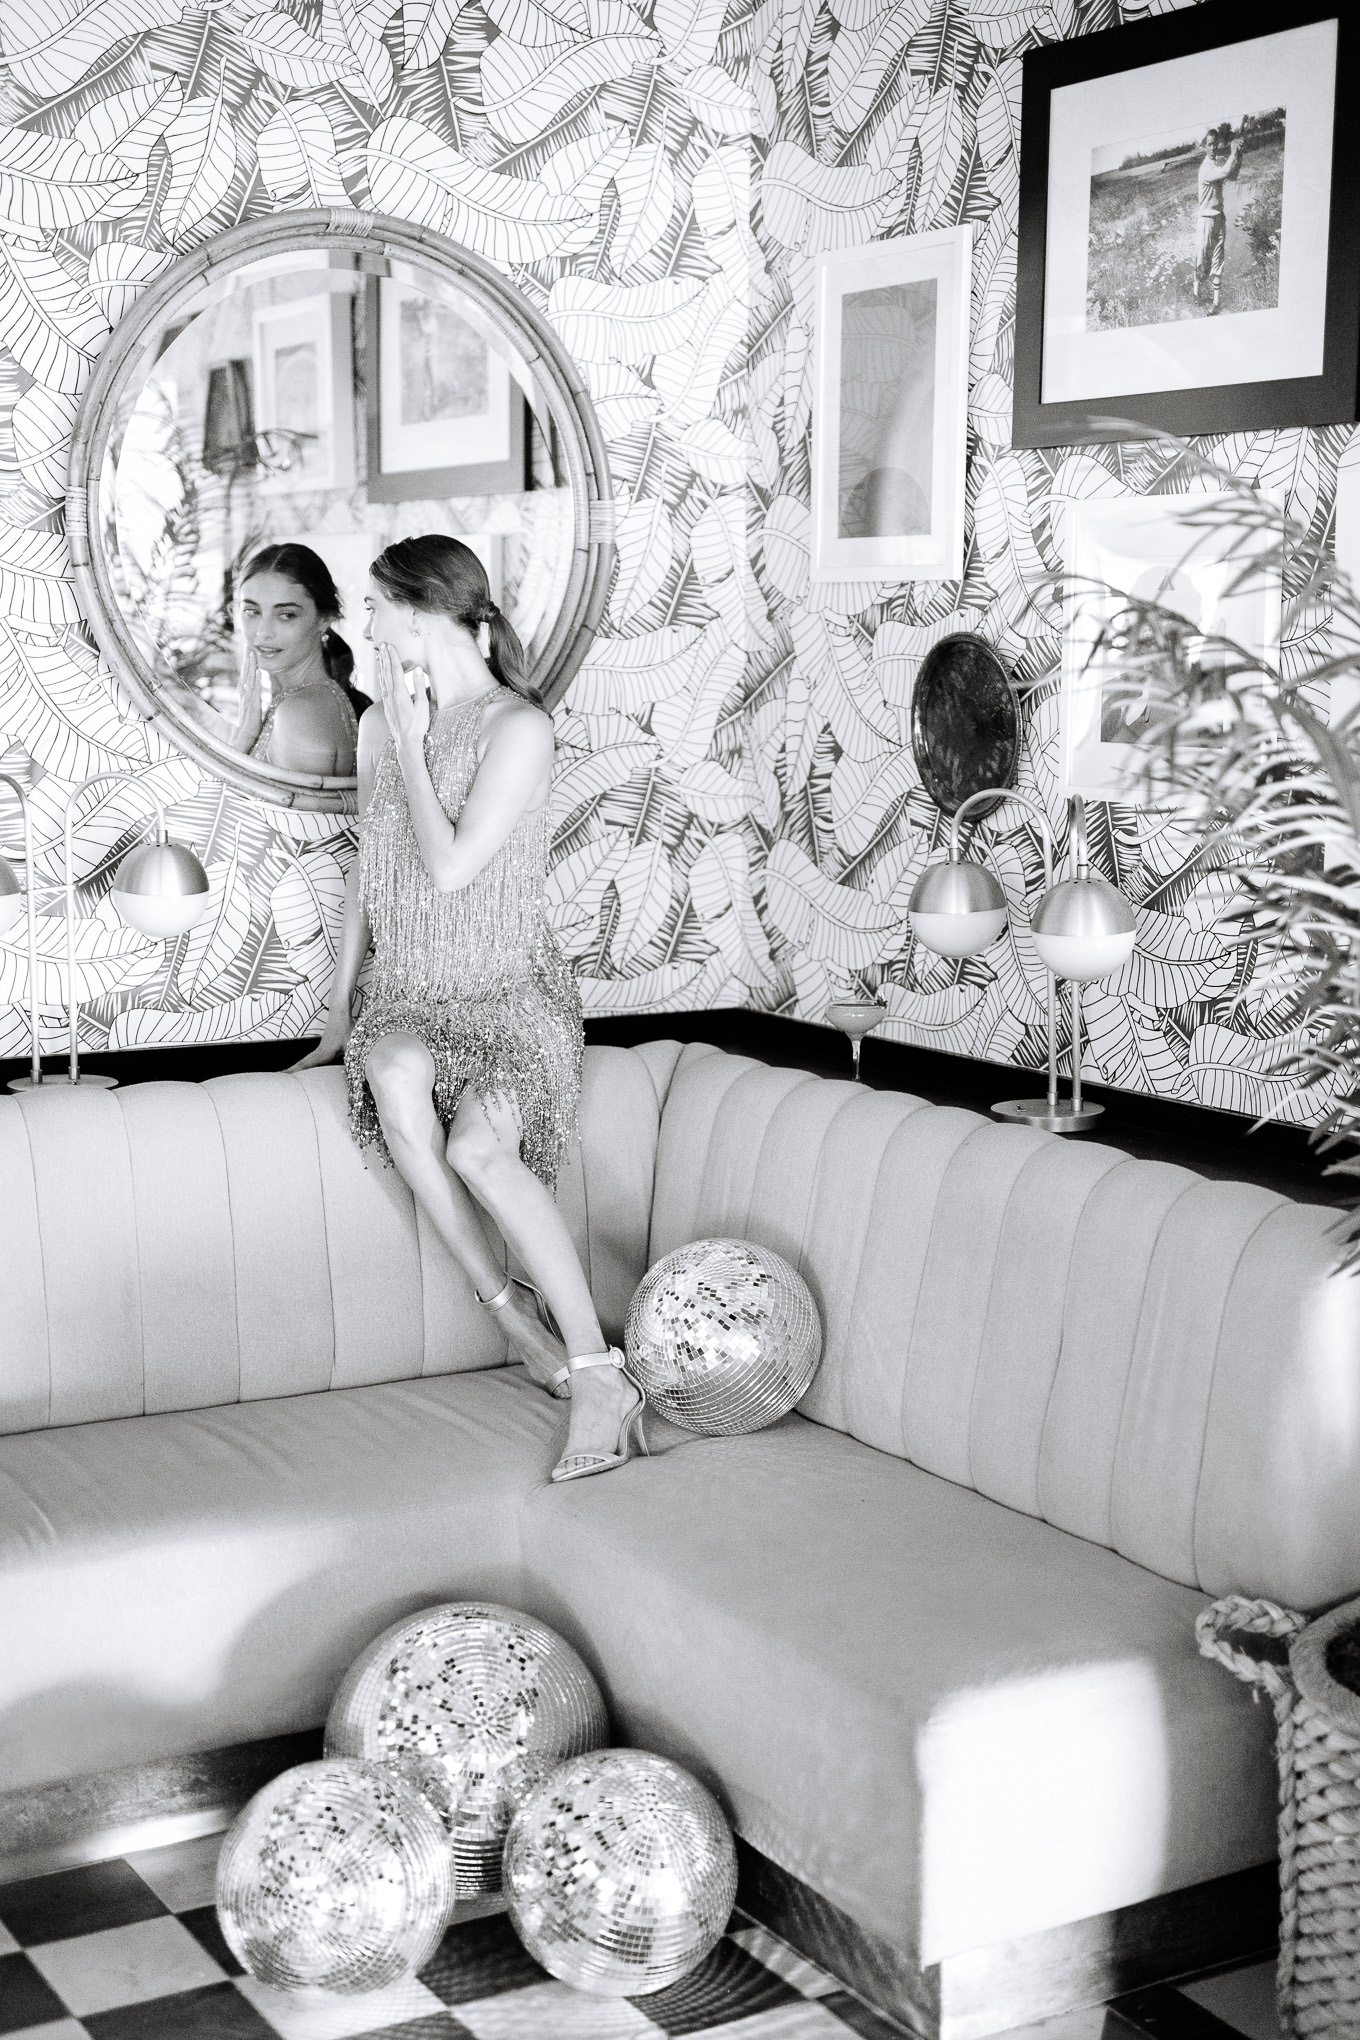 Black and white disco ball photo in Pink Cabana Restaurant | Kindred Presets x Mary Costa Photography Sands Hotel Ad Campaign | Colorful Palm Springs wedding photography | #palmspringsphotographer #lightroompresets #sandshotel #pinkhotel   Source: Mary Costa Photography | Los Angeles